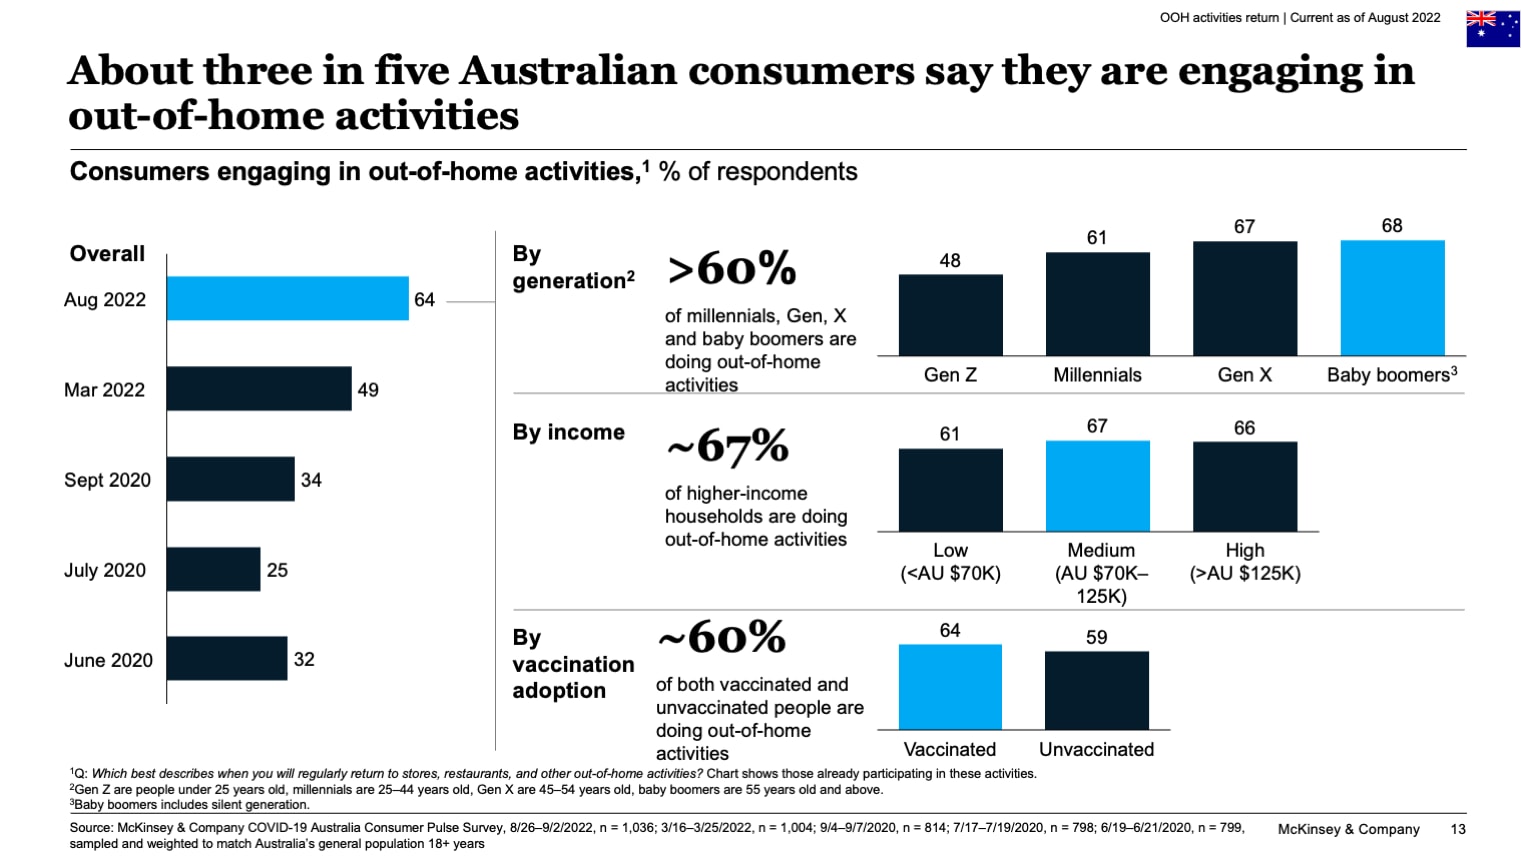 About three in five Australian consumers say they are engaging in out-of-home activities